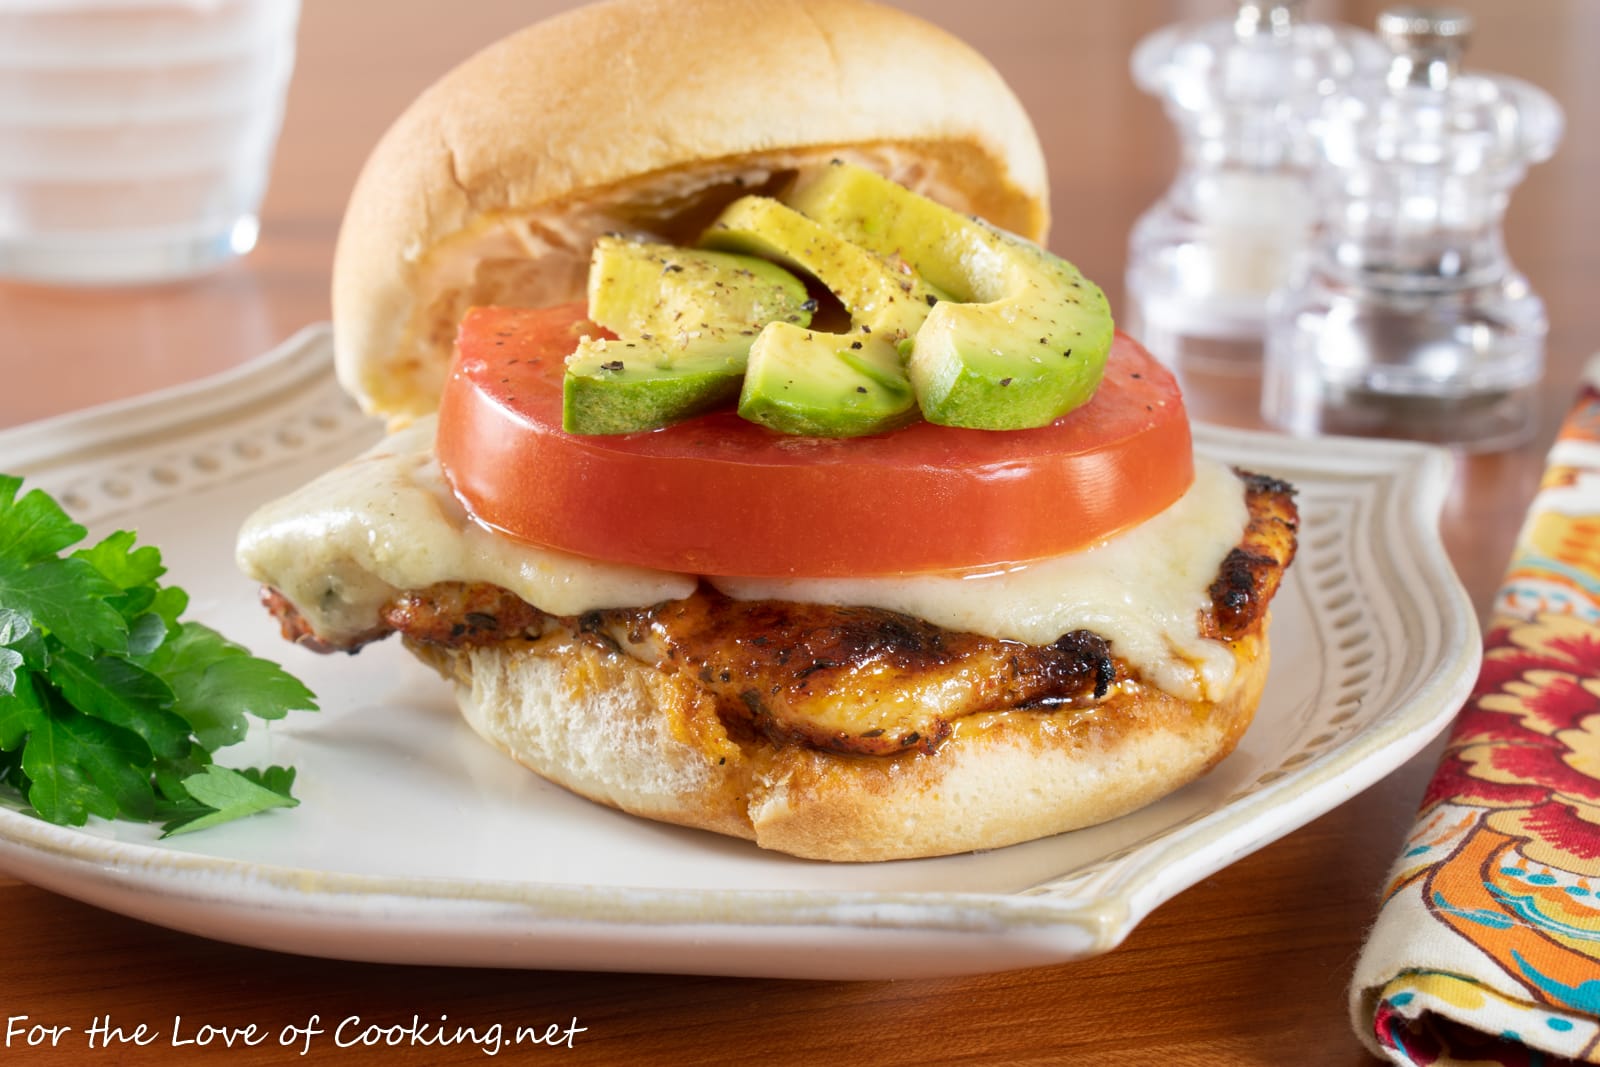 Blackened Chicken Sandwiches with Chipotle Mayonnaise and Avocado